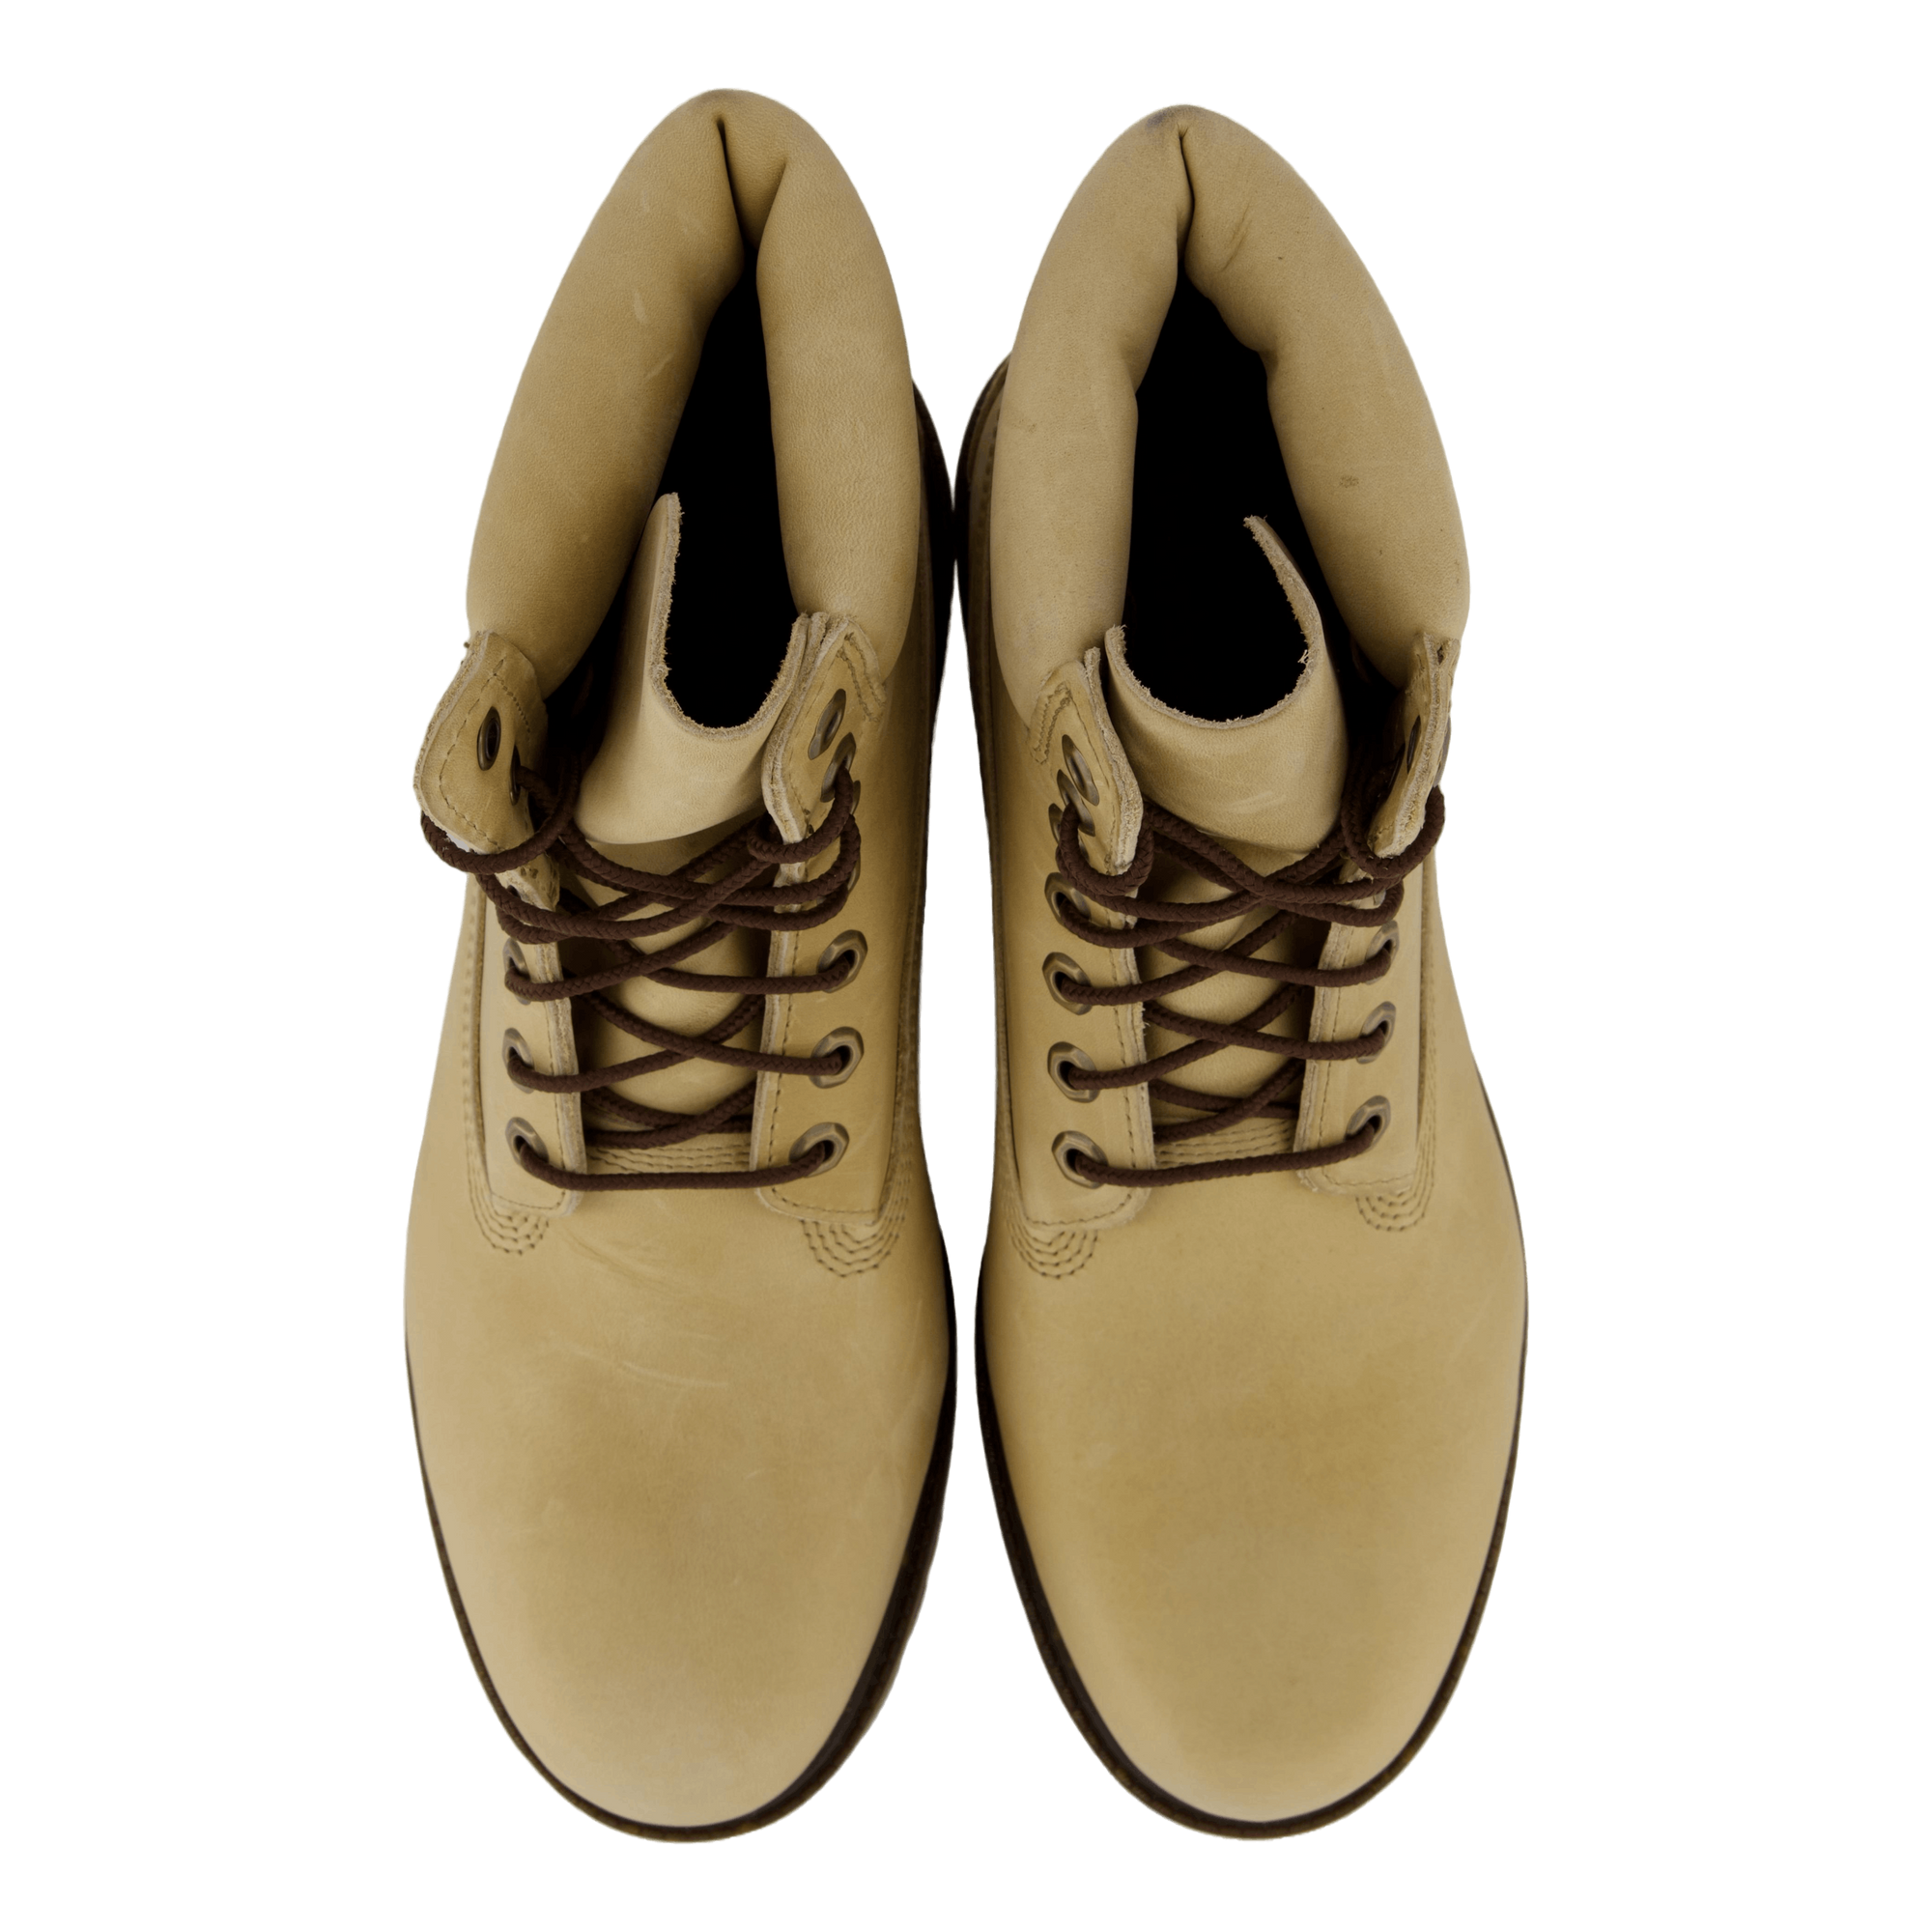 Timberland Heritage 6 Inch Lac Light Beige Full Grain